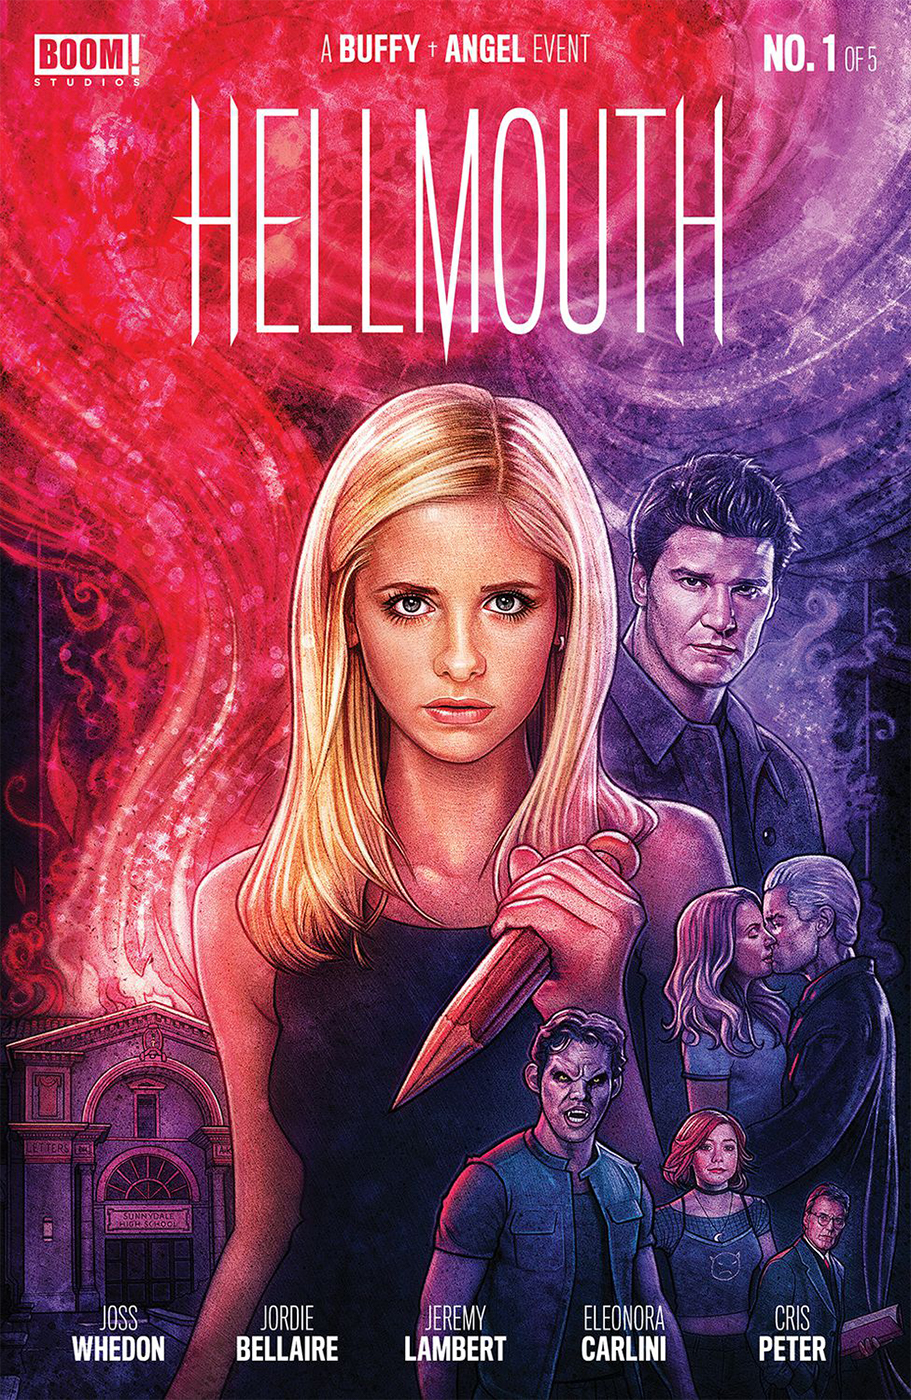 Buffy the Vampire Slayer - Hellmouth #1 Variant Cover